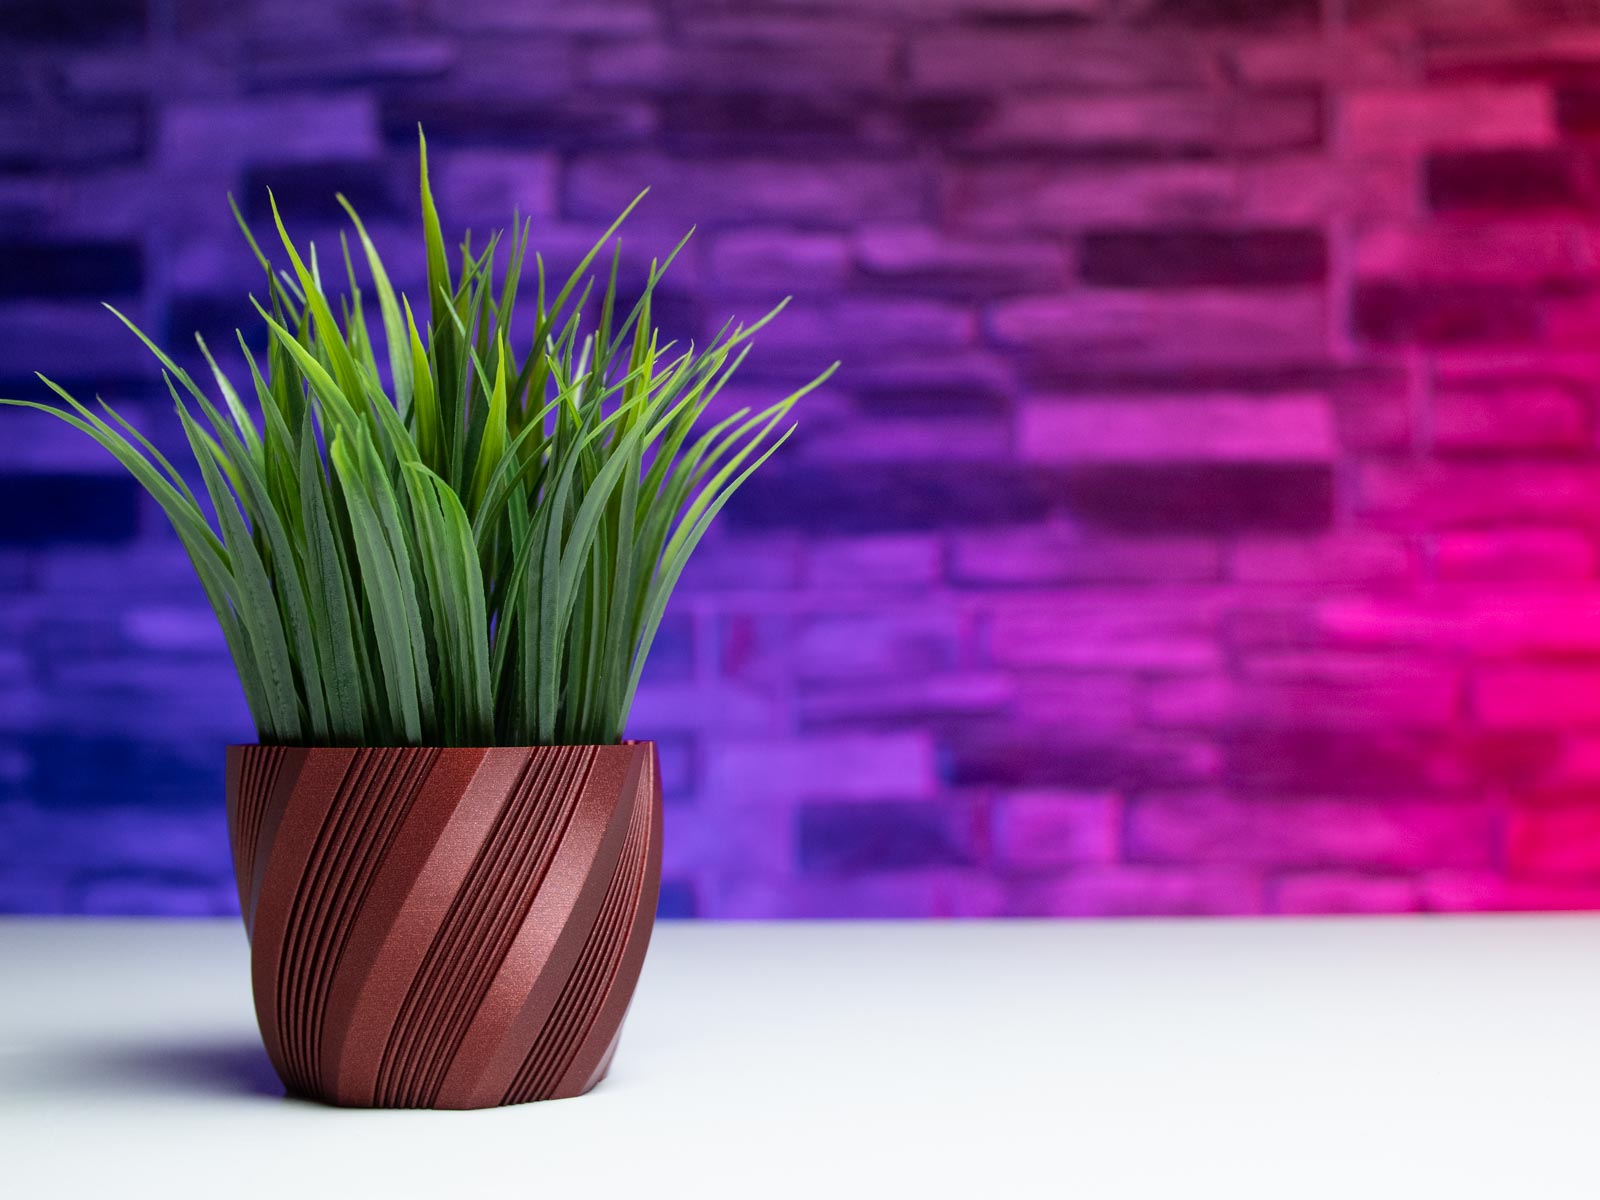 3D Printed Planter and Pot for Ikea Fejka - Vase ELLY